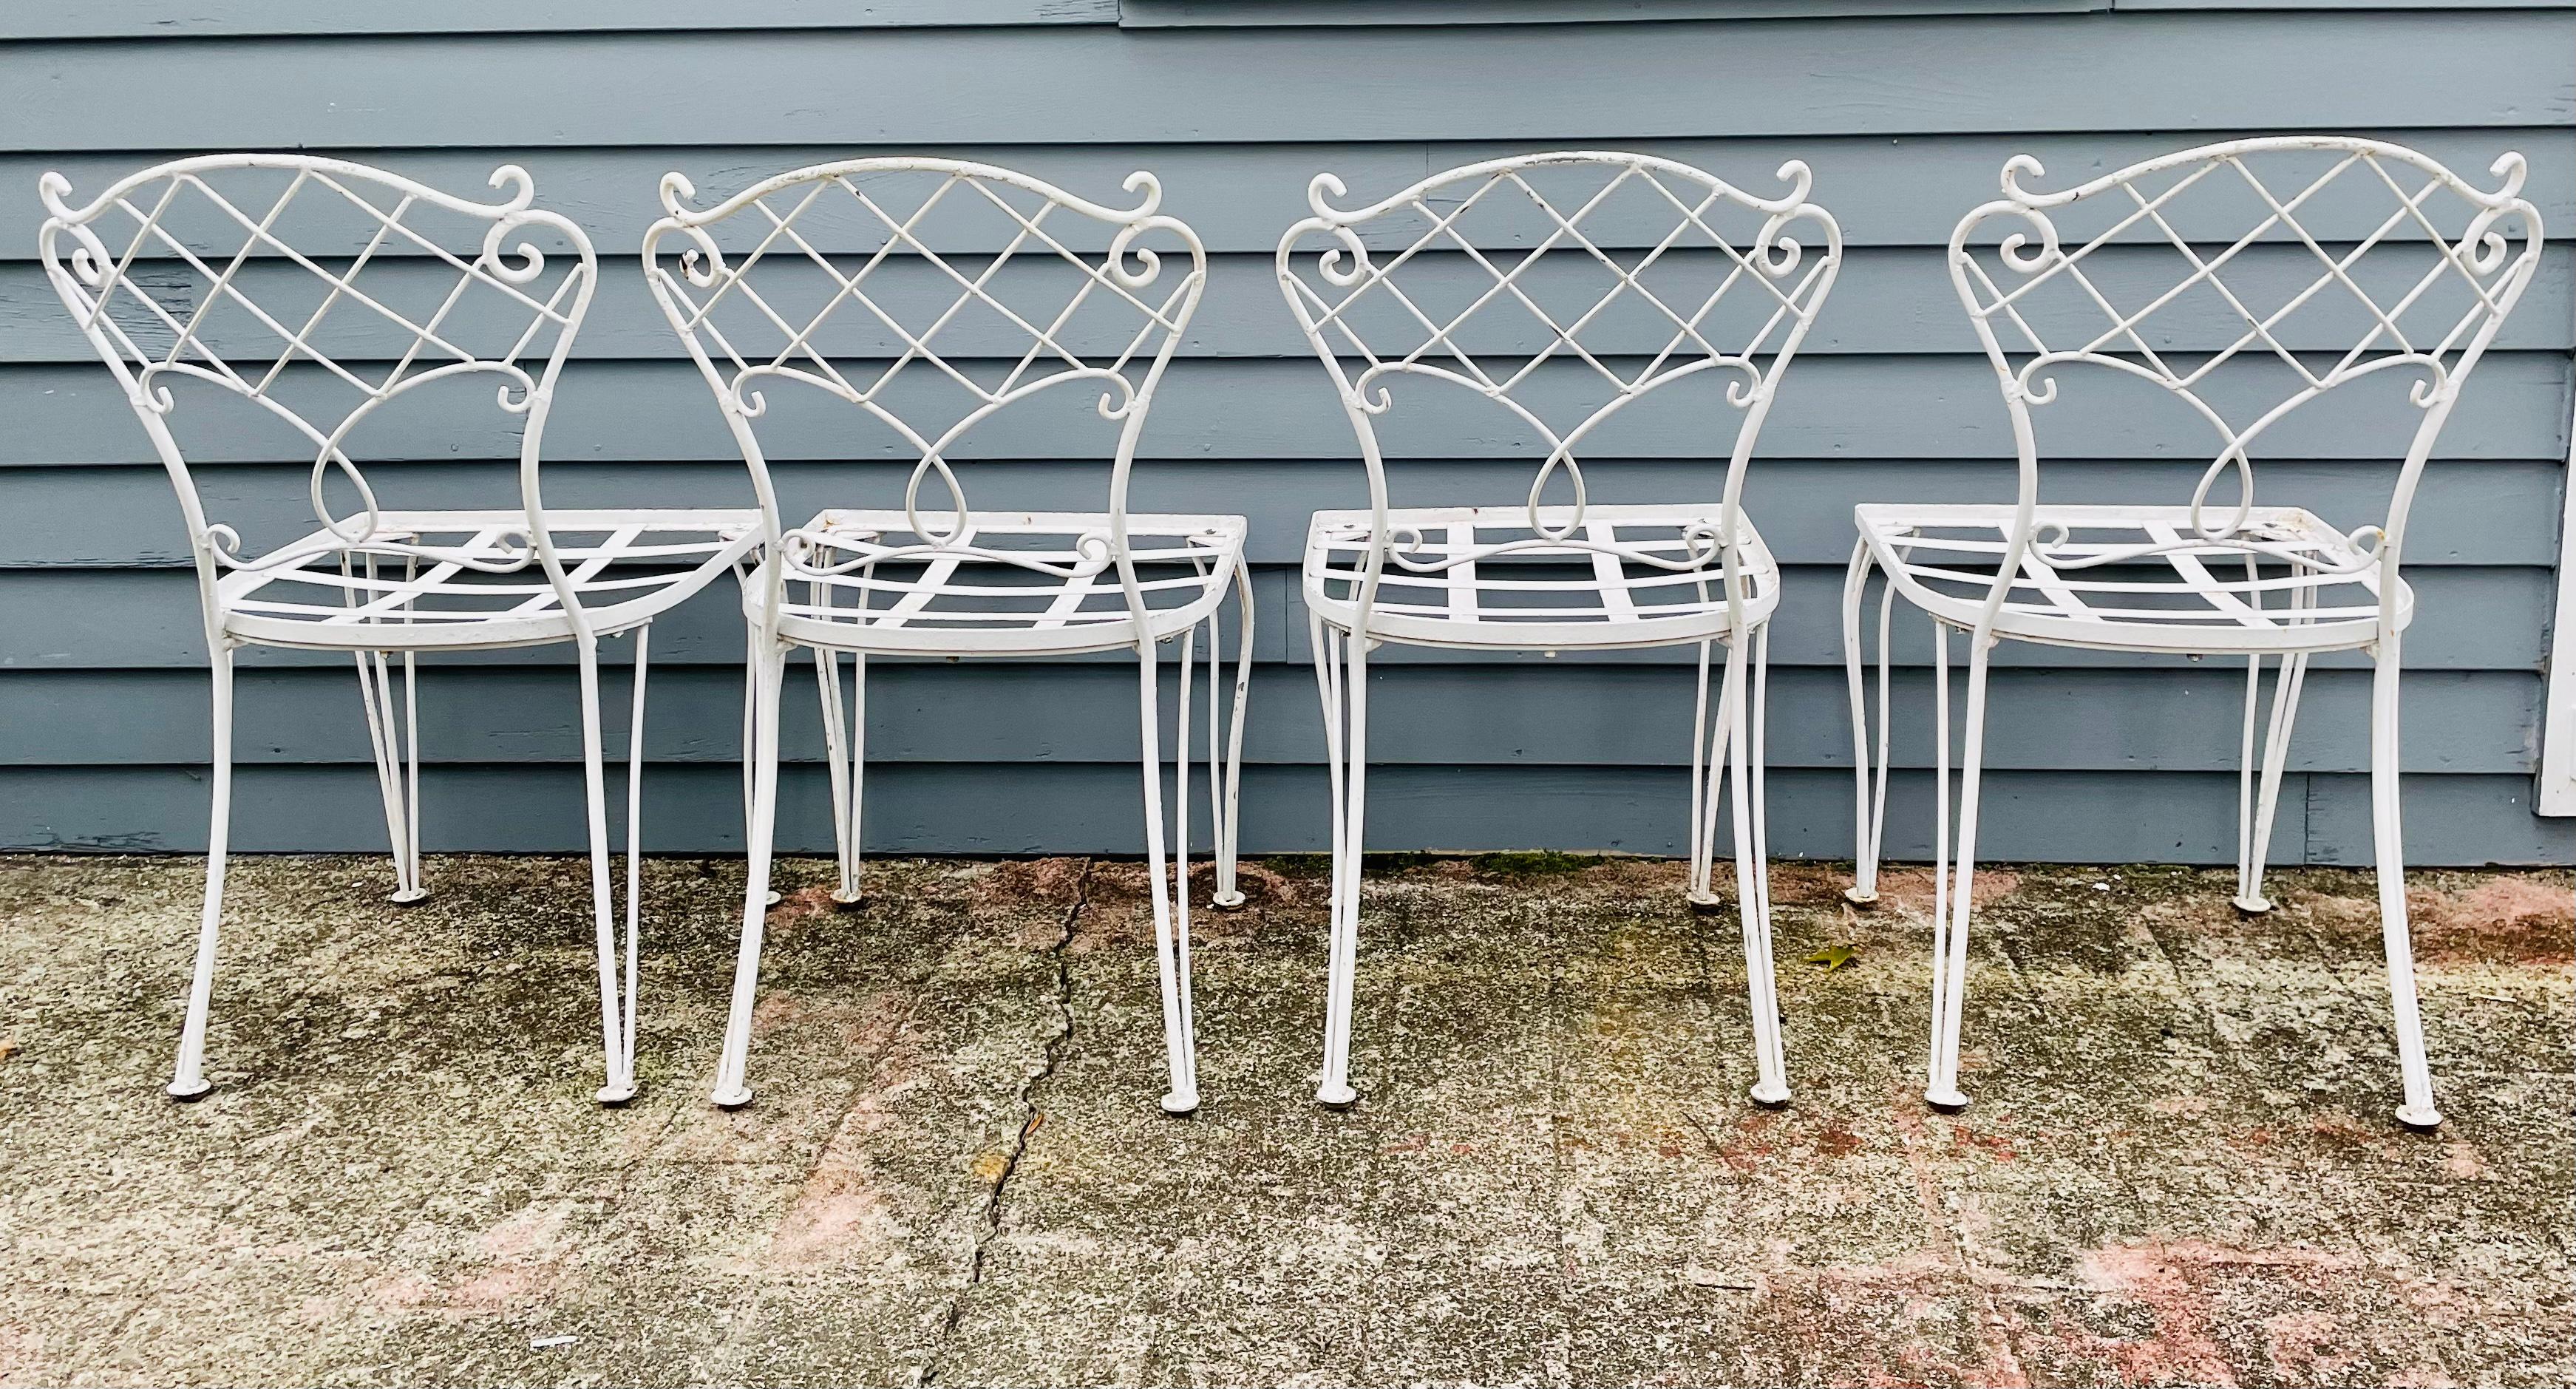 20th Century Set of 4 Vintage Wrought Iron Chairs For Sale